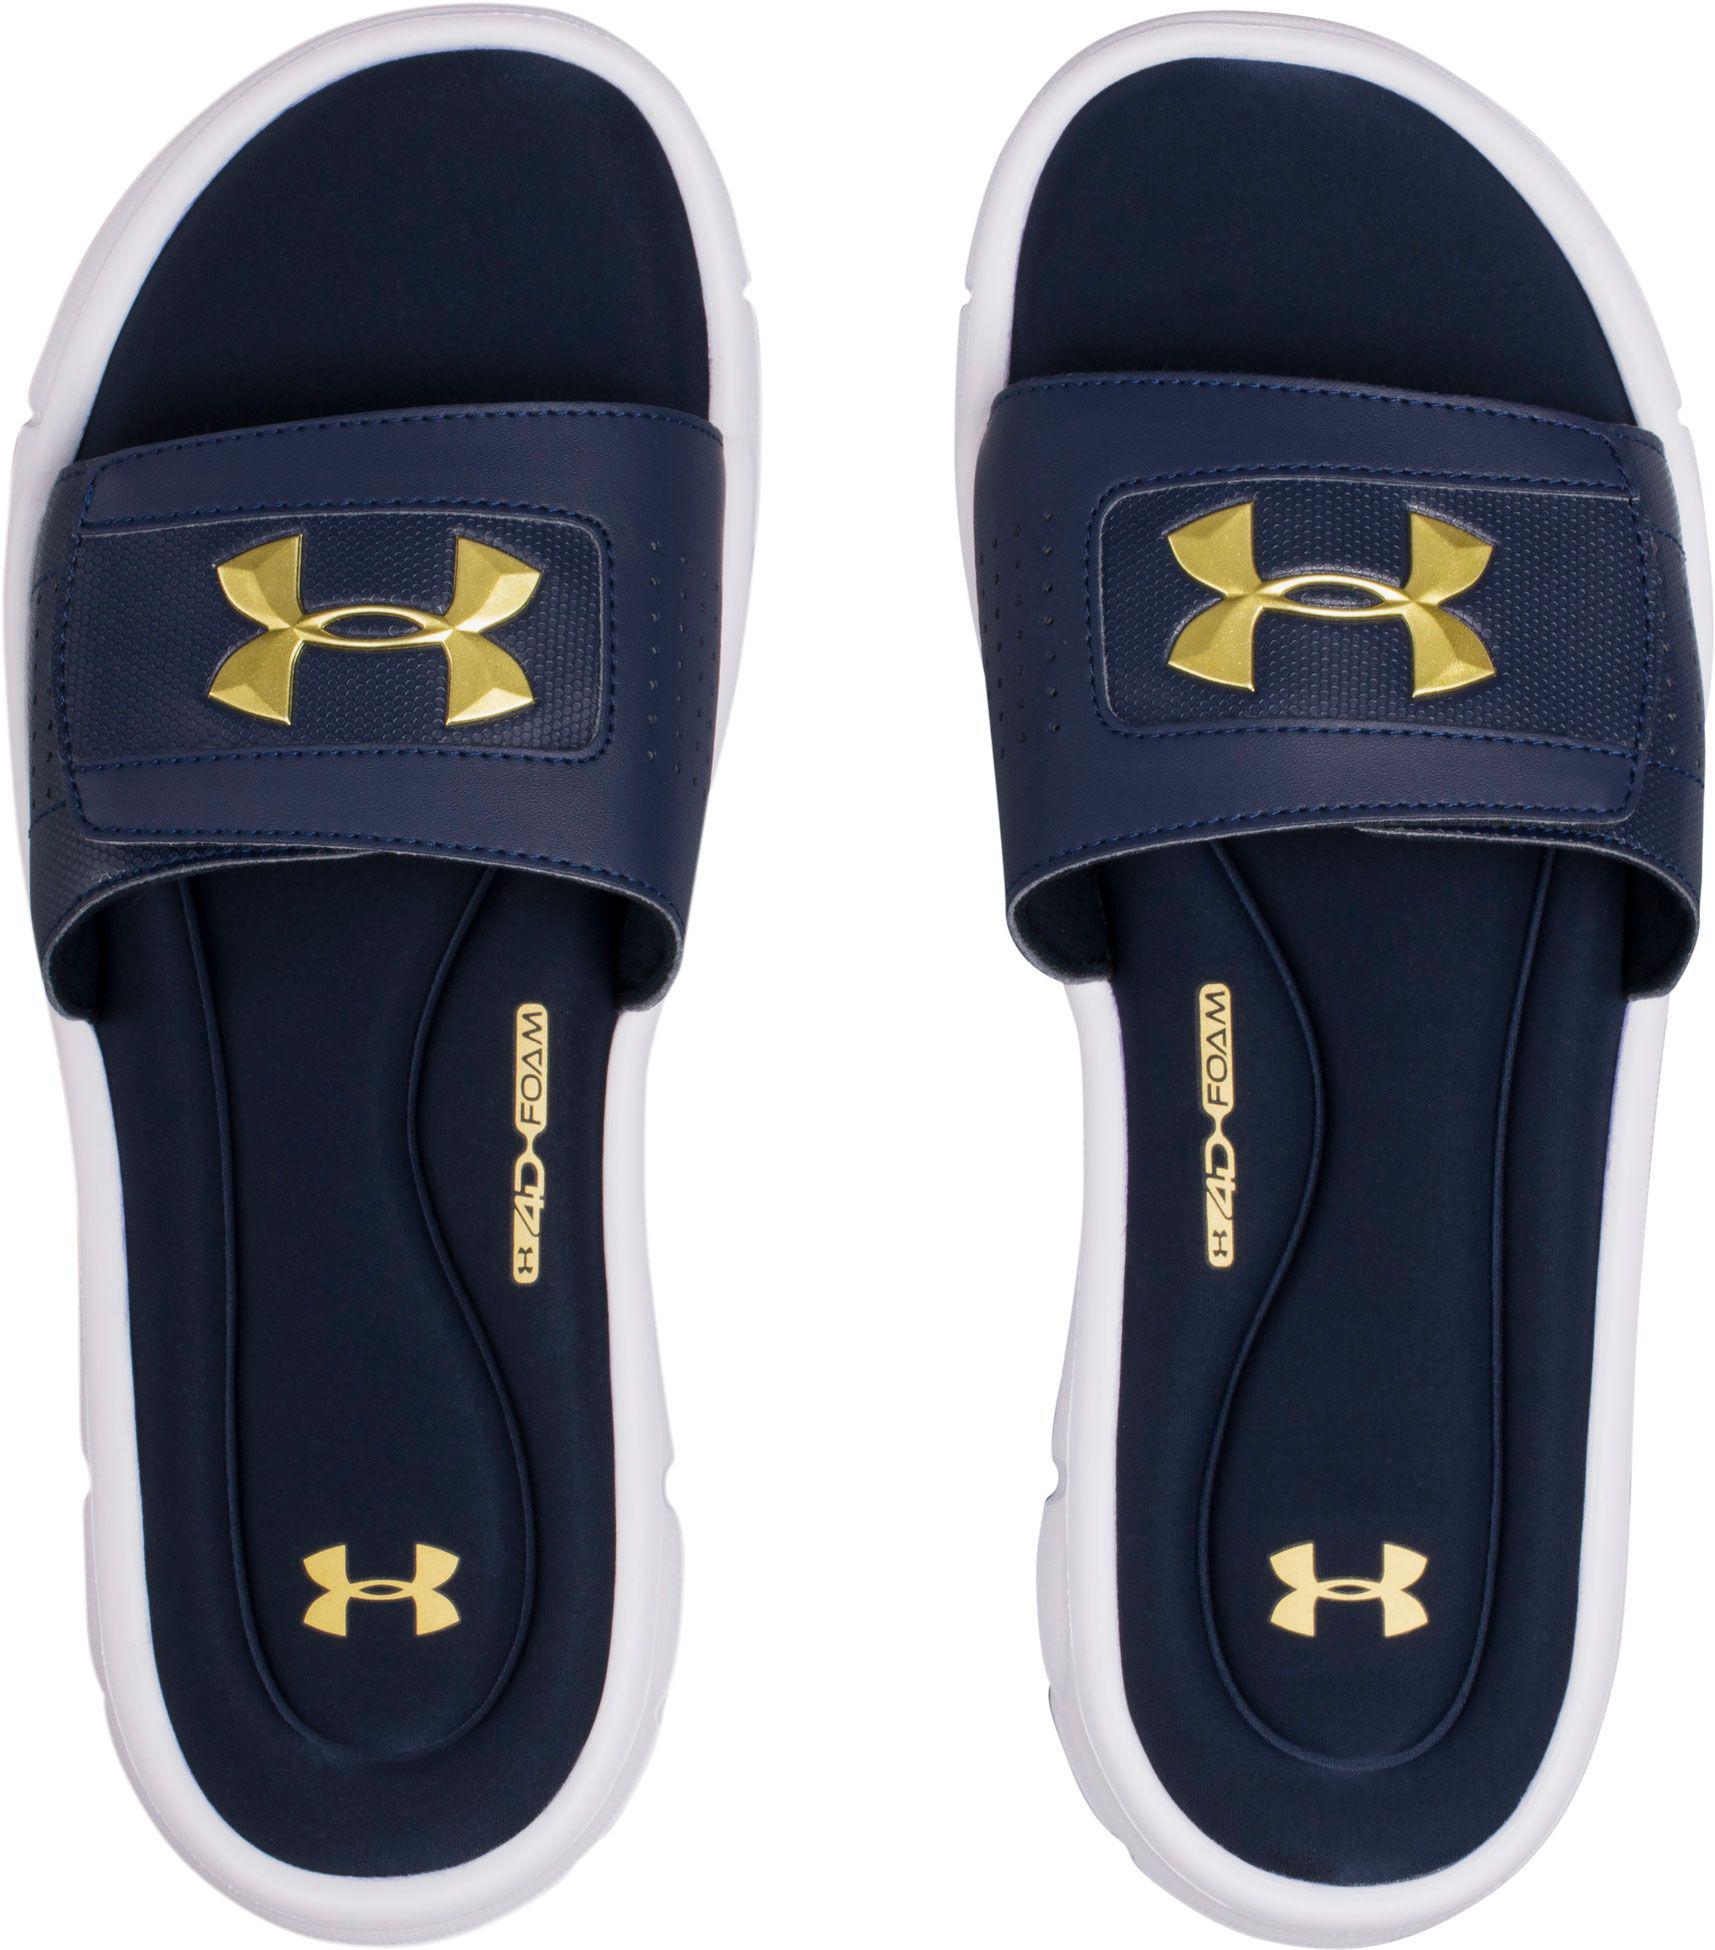 navy and gold under armour shoes